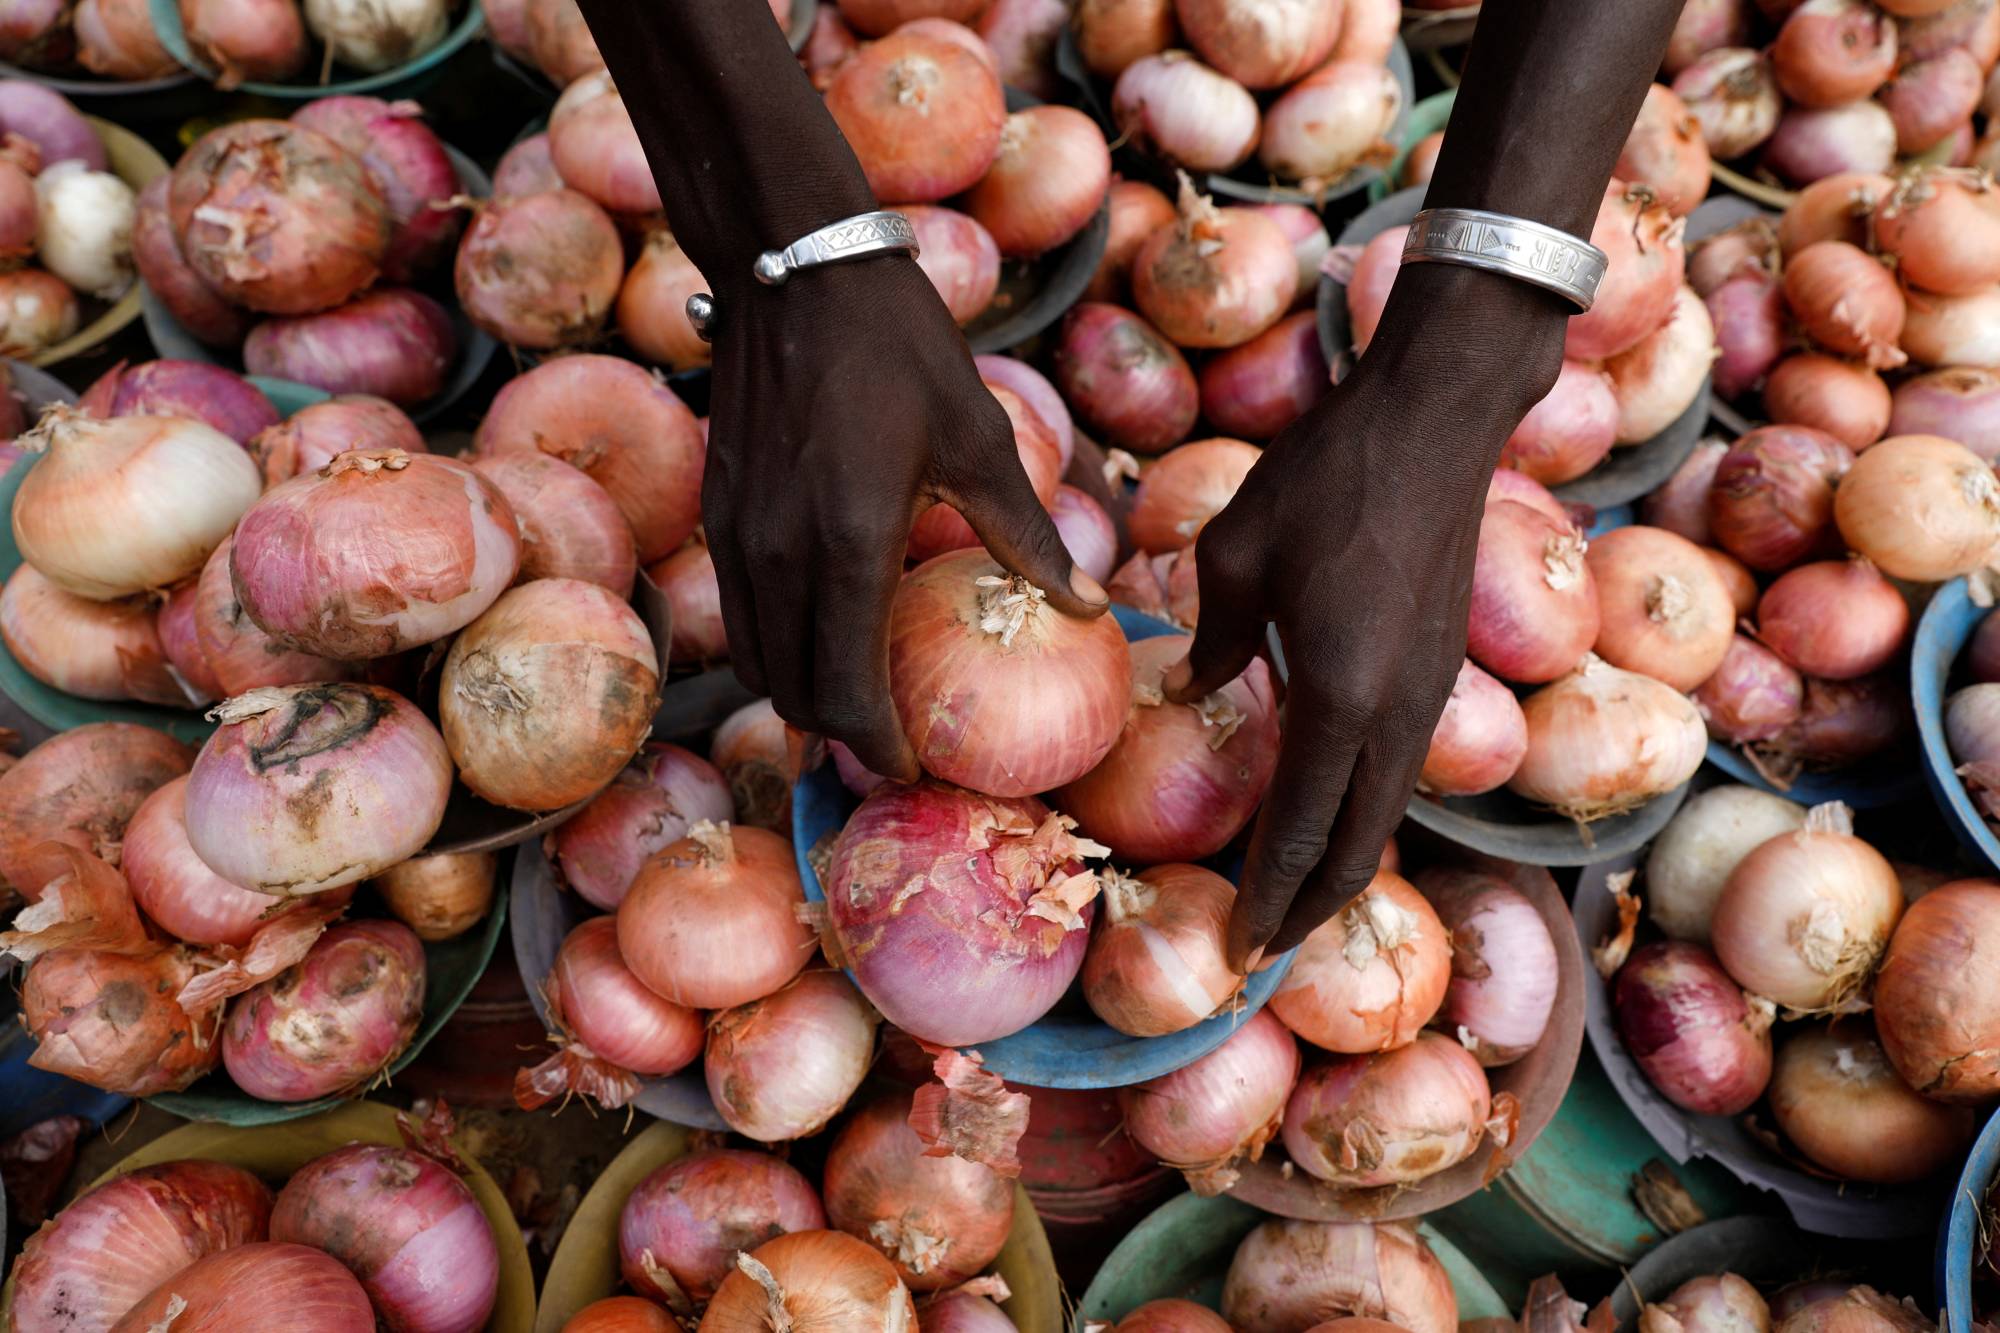 A vendor arranges onions for sale at a market in Lagos in May. Anecdotal evidence suggests that among the Nigerian middle class, emigration has spiked, fueled by a slumping currency, worsening insecurity, spiraling inflation and corruption. | REUTERS